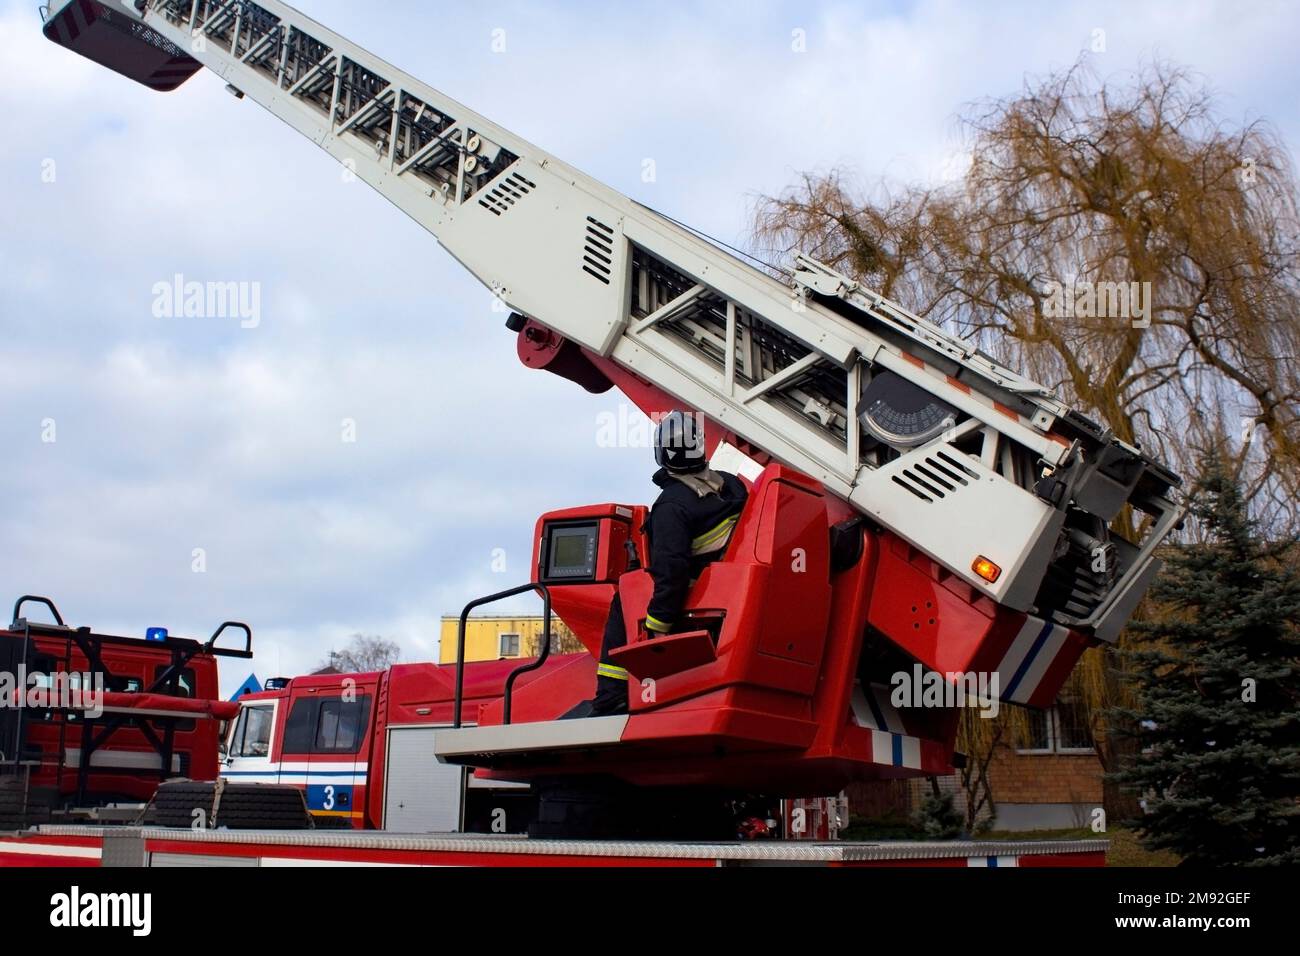 High retractable fire ladder with stall against blue sky, firefighter's rescue equipment. There is a rescuer in the control booth of the fire truck. Stock Photo